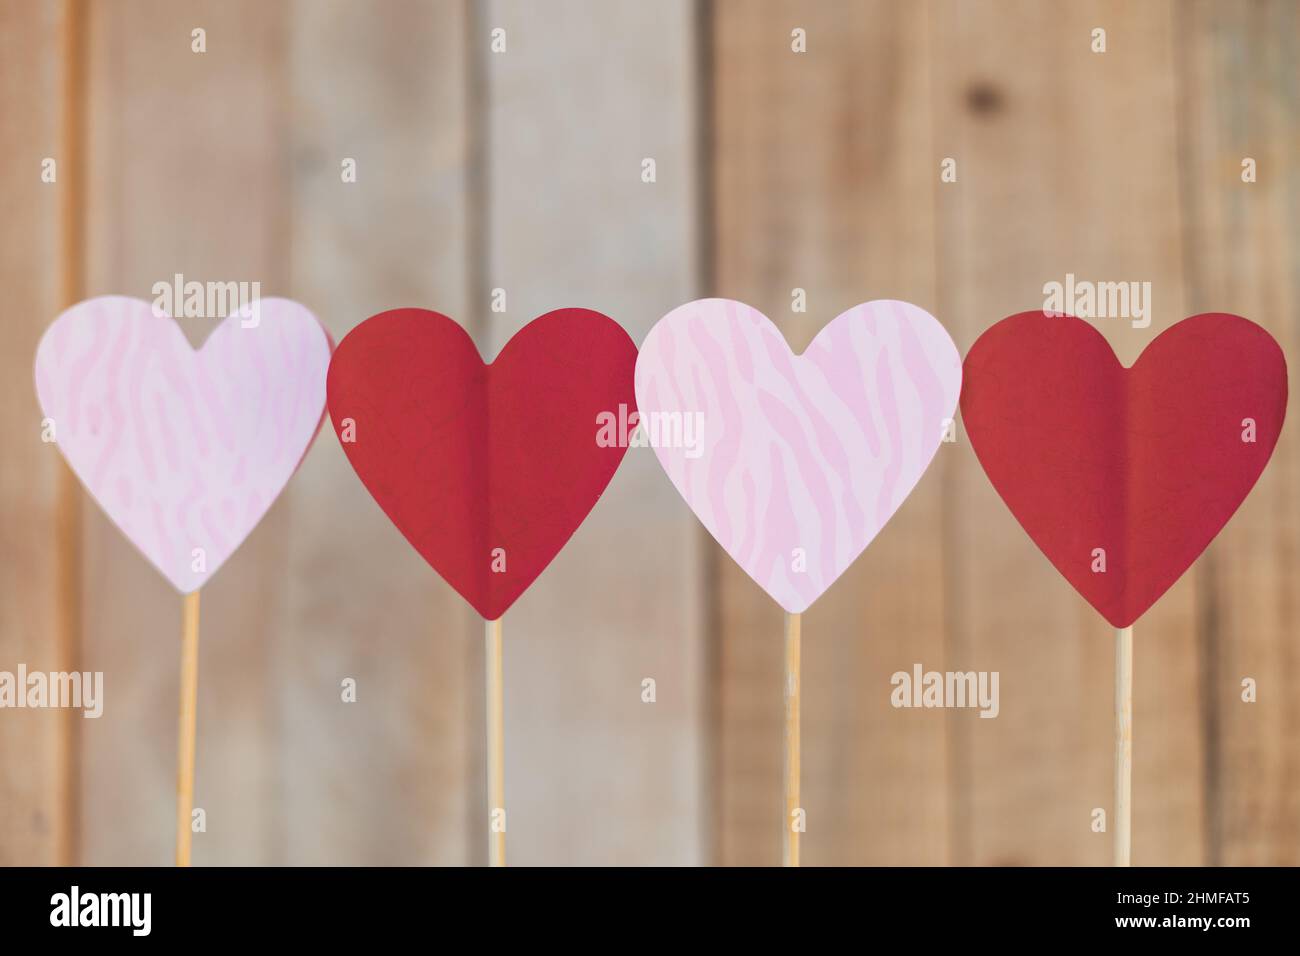 hearts of red and pink colors on wooden background, valentine's day Stock Photo